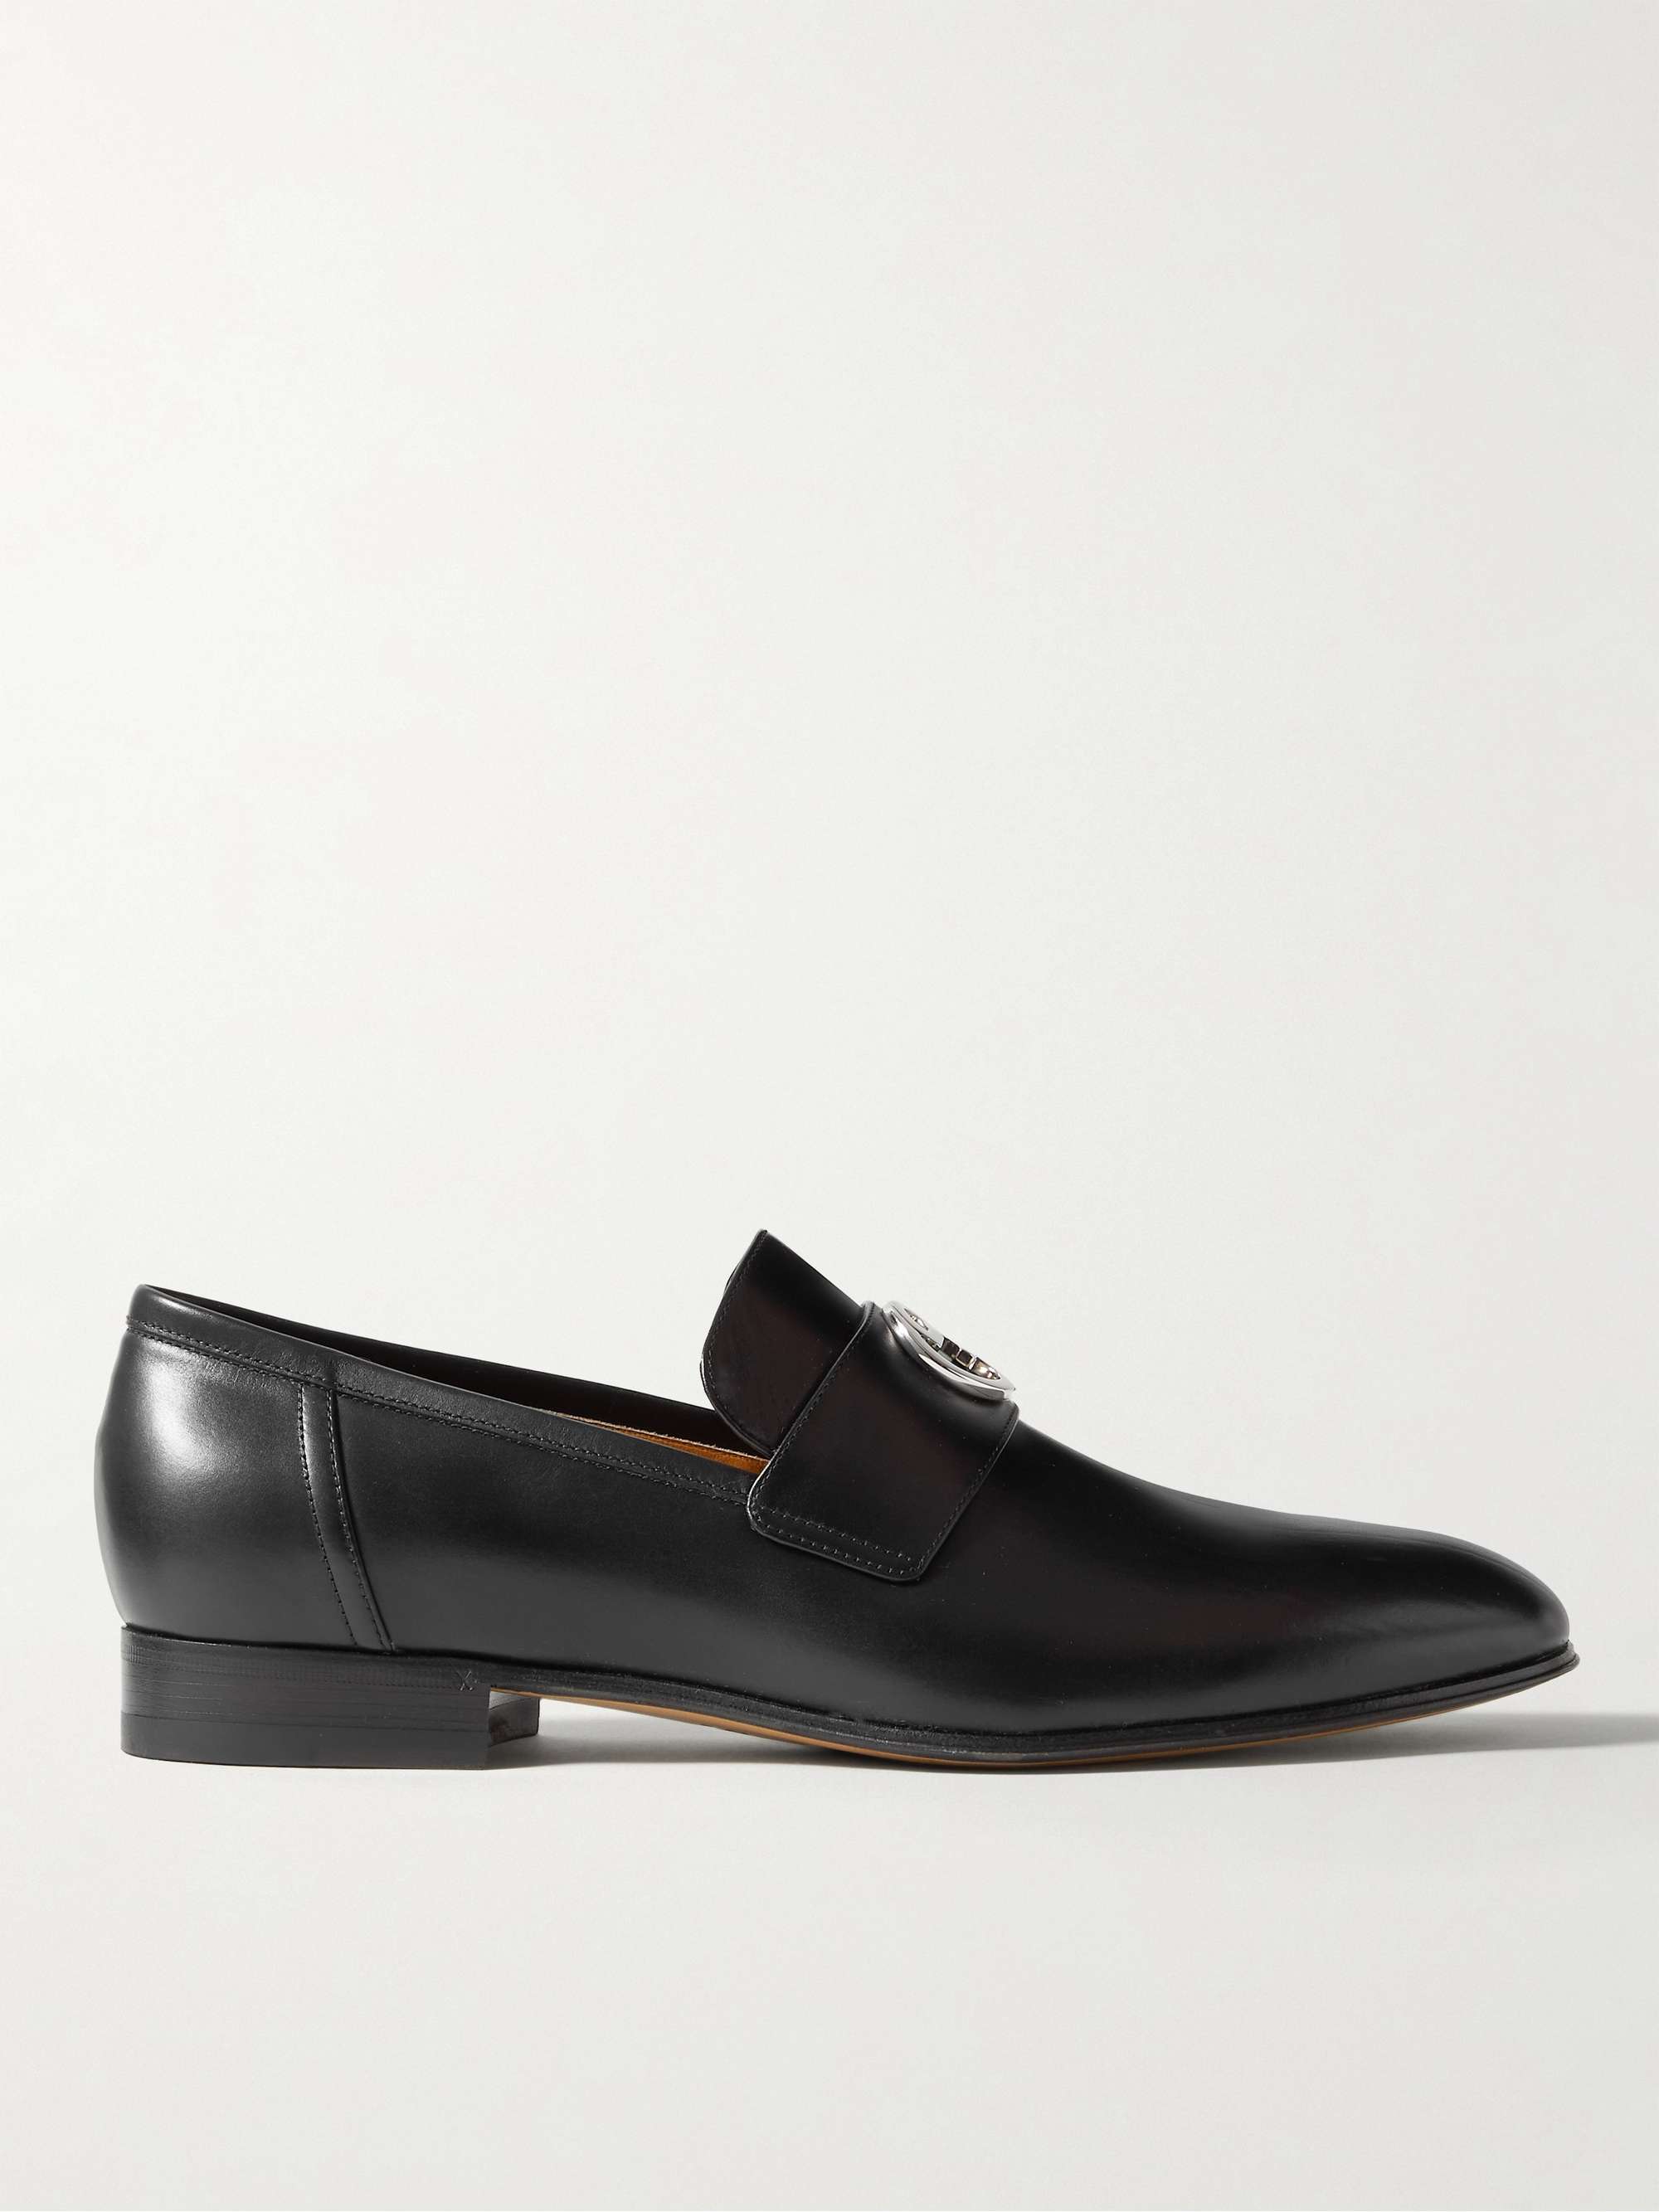 GUCCI Logo-Detailed Leather Loafers | MR PORTER